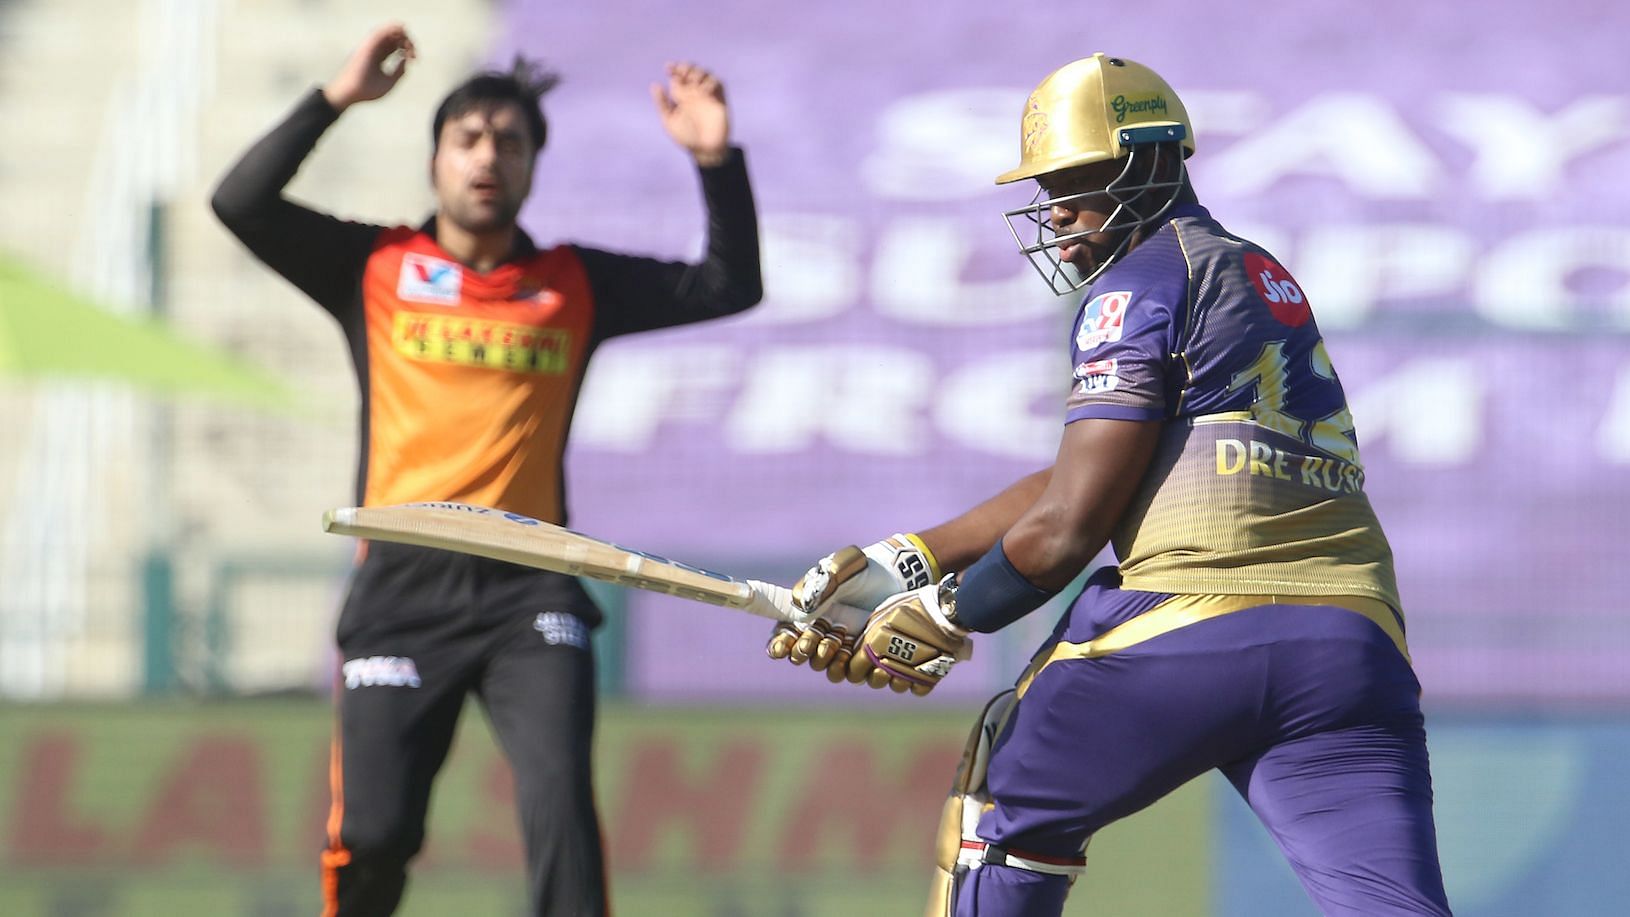 Kolkata Knight Riders’ big-hitting Andre Russell hasn’t clicked with the bat yet in this season of the IPL.